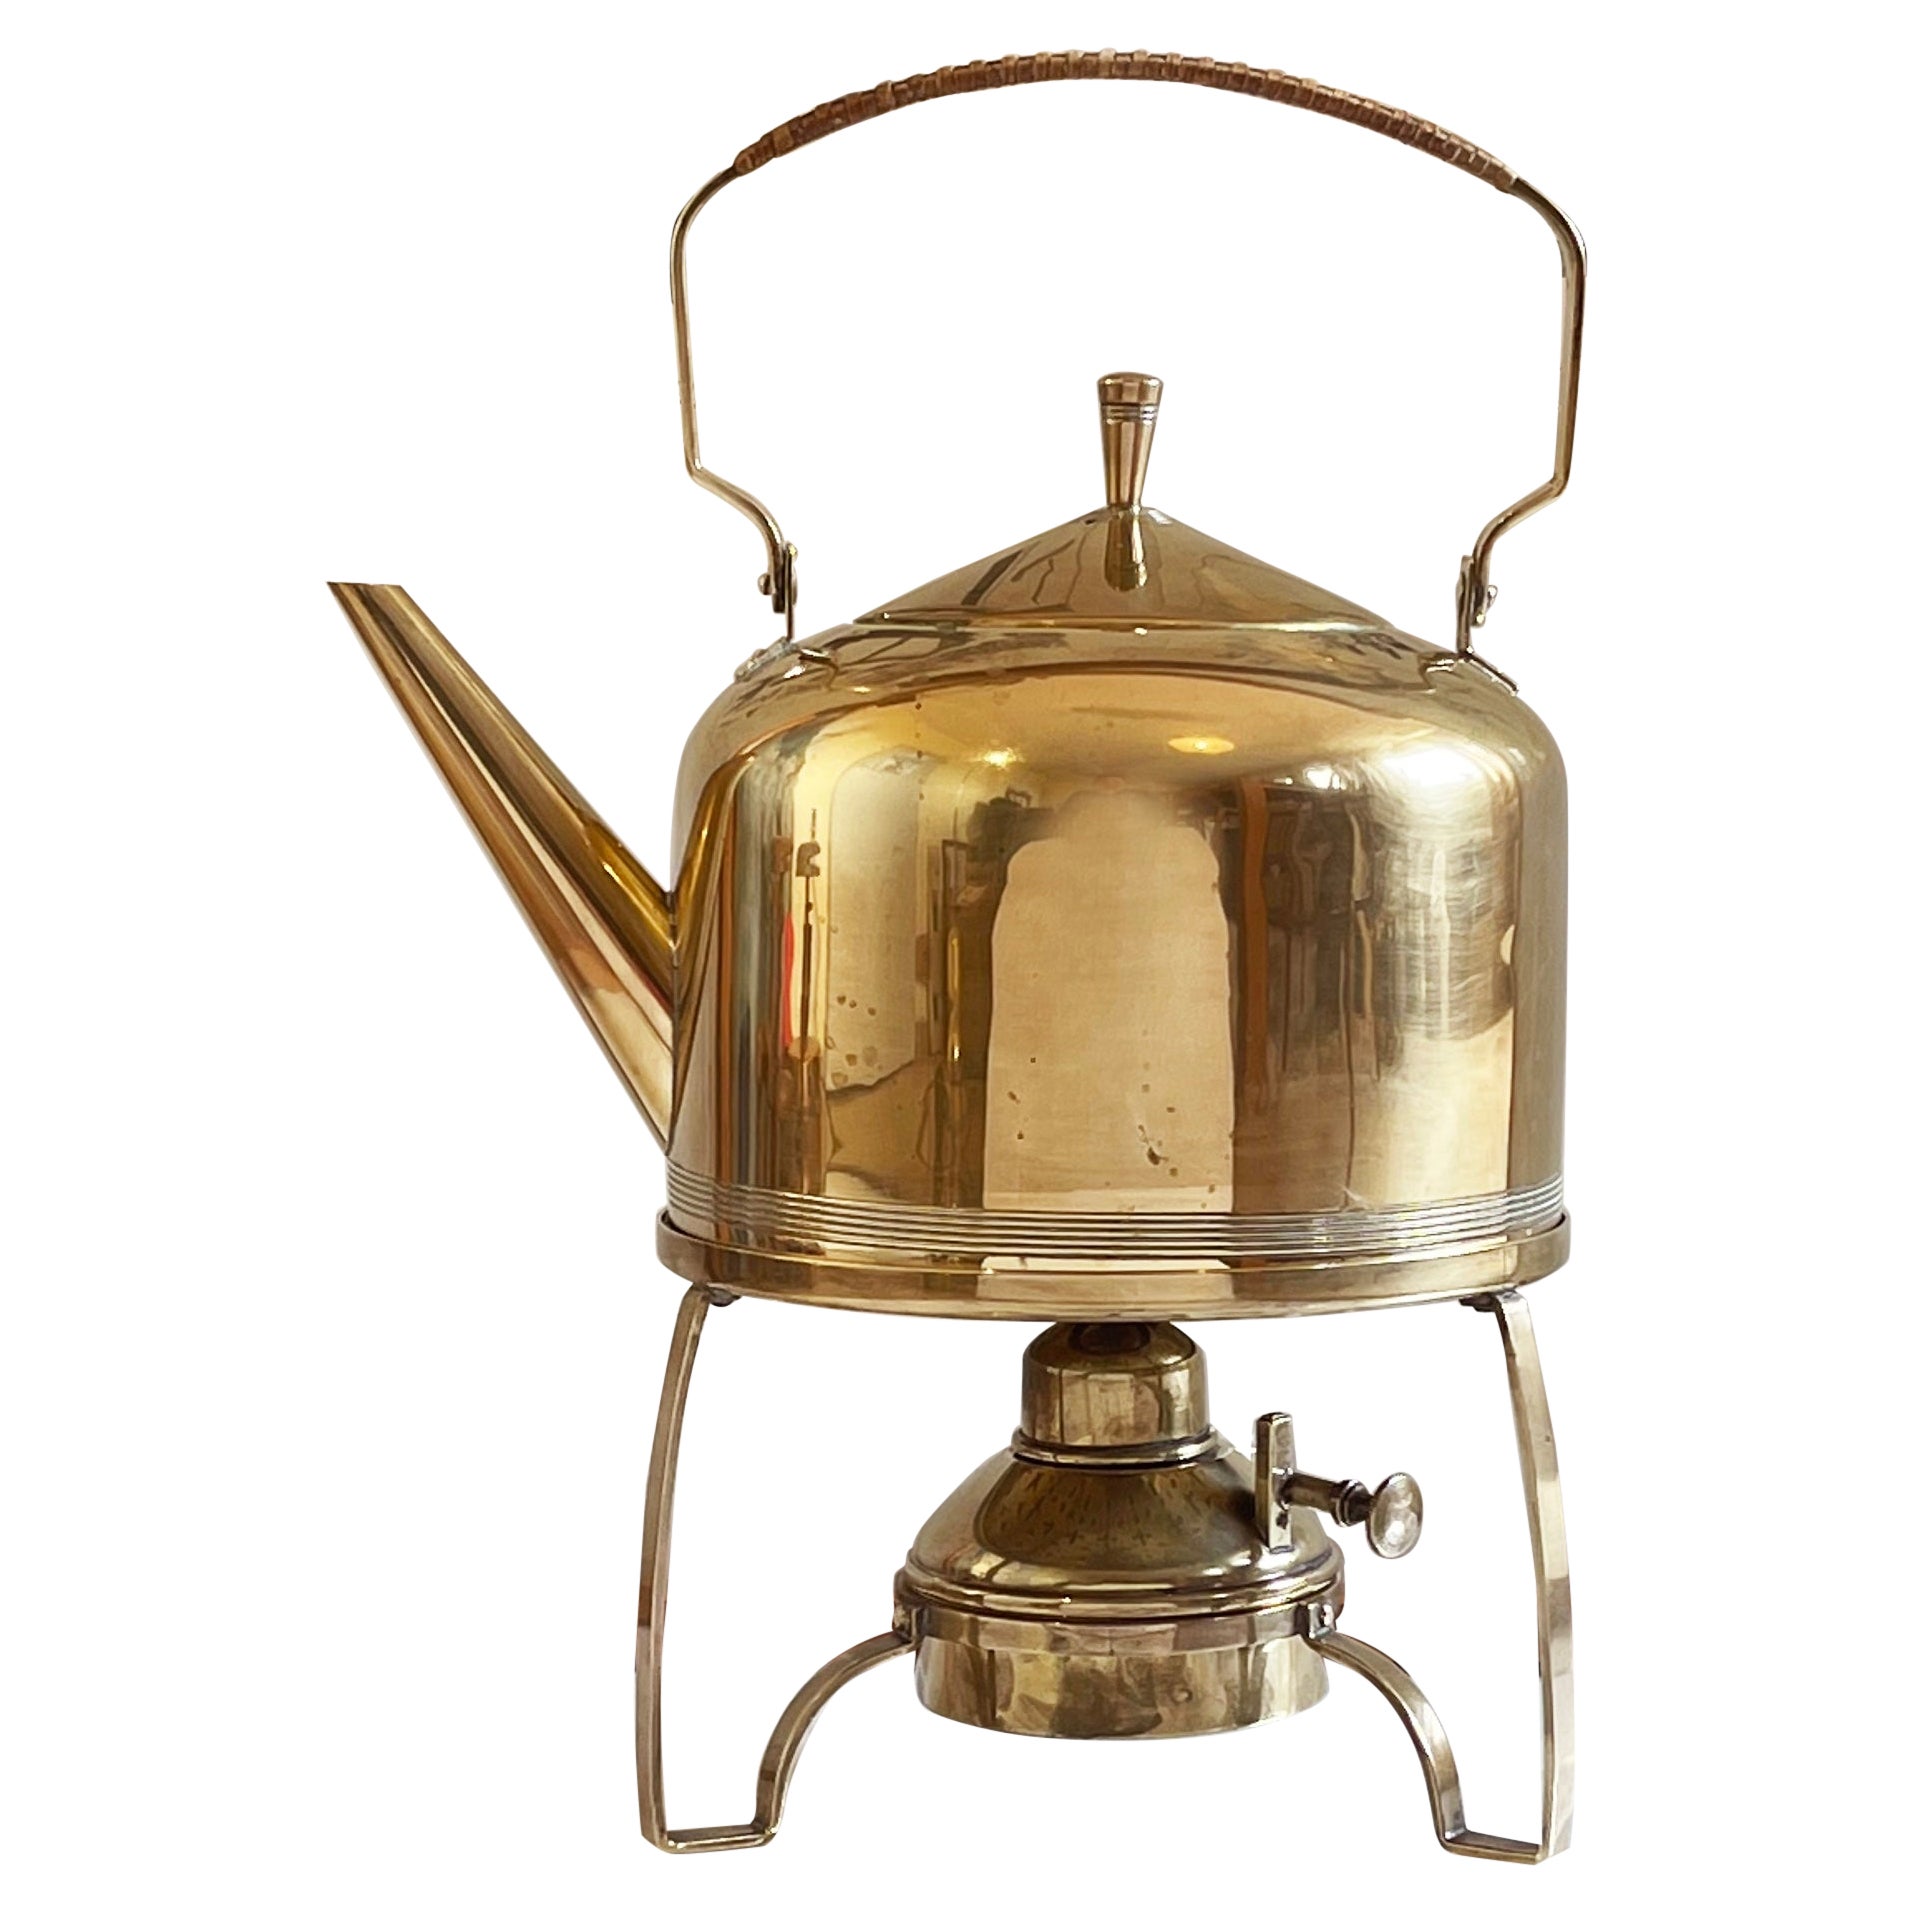 Art Nouveau Teapot & Warmer Brass-Early 20th Century by F. & R. Fischer, Germany For Sale